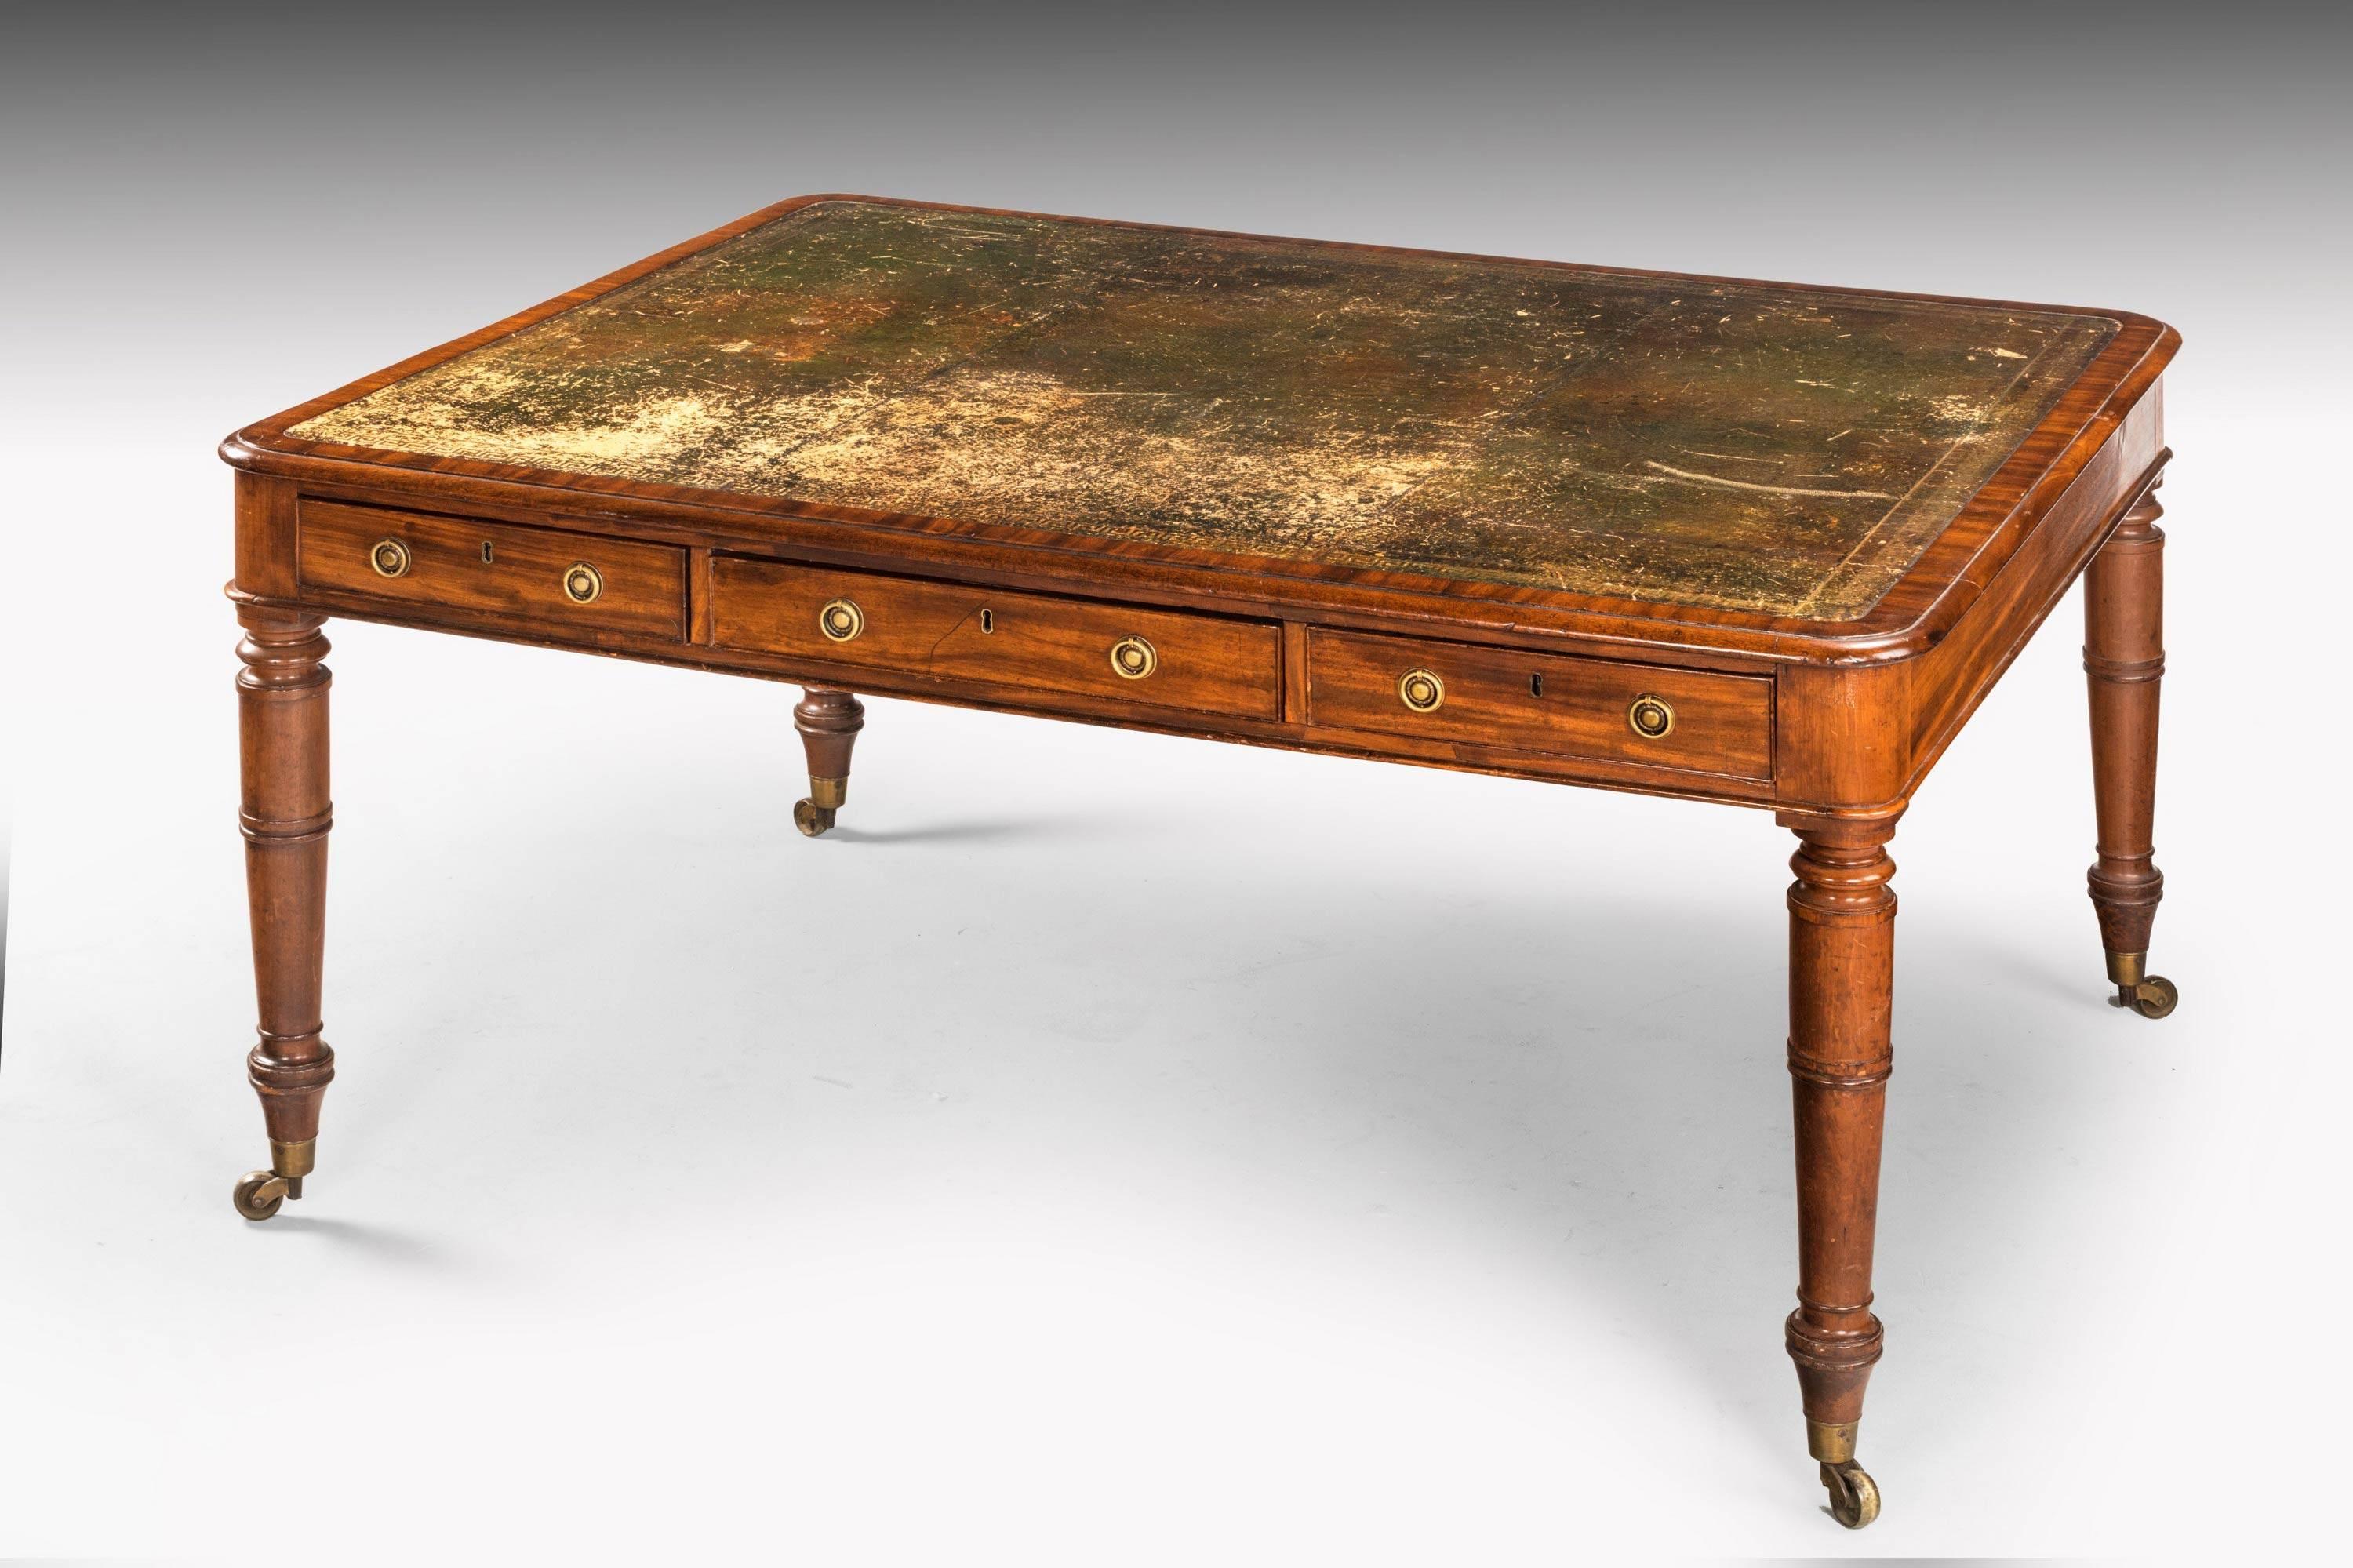 19th Century Late Regency Period Mahogany Six-Drawer Library Table